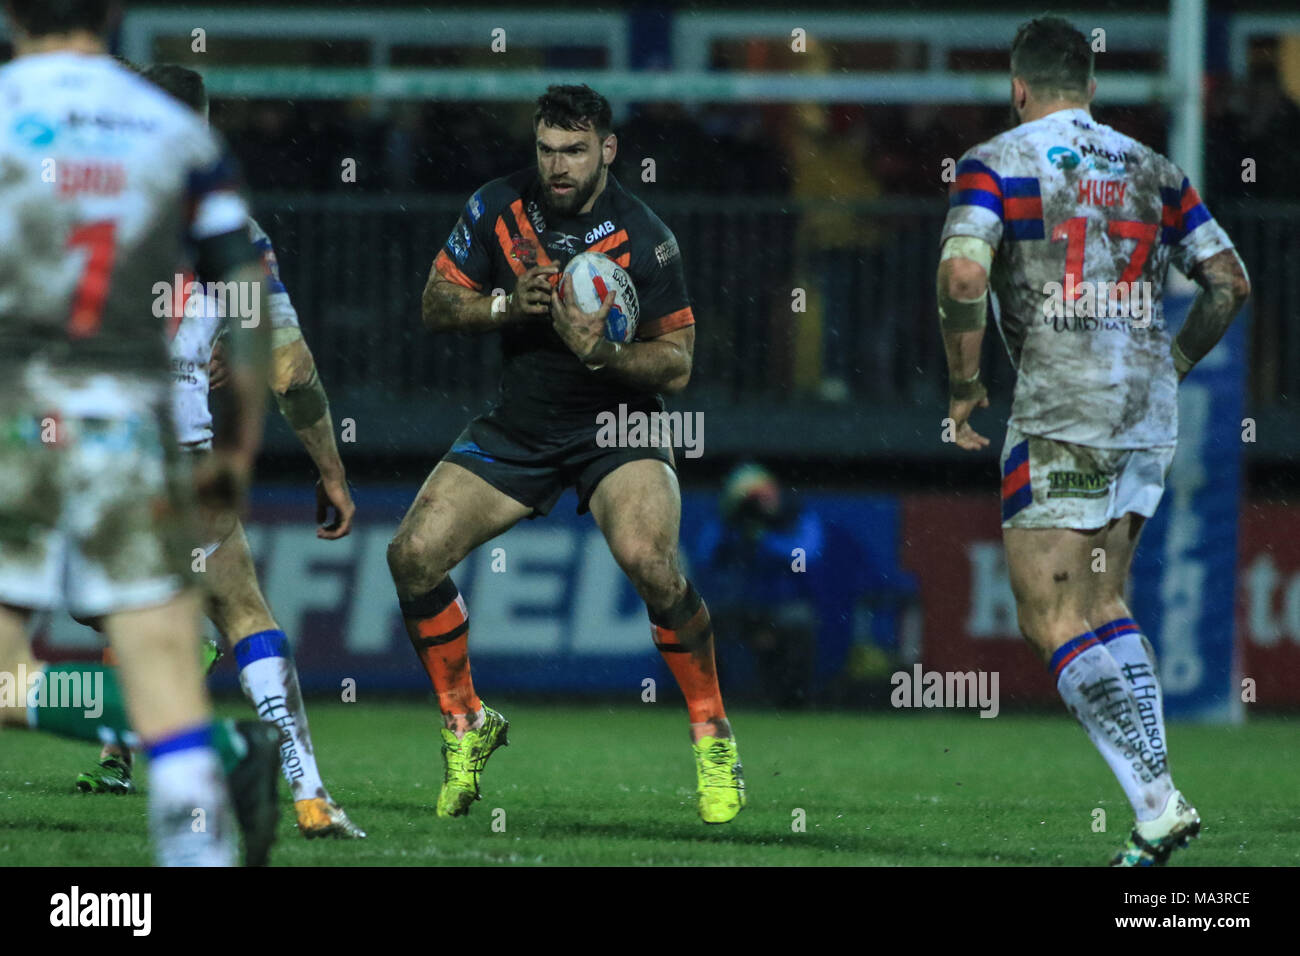 Wakefield, UK. 29th March 2018 , Mobile RocketStadium, Wakefield, England; Betfred Super League rugby, Wakefield Trinity v Castleford Tigers; Matt Cook of Castleford Tigers Credit: News Images/Alamy Live News Stock Photo